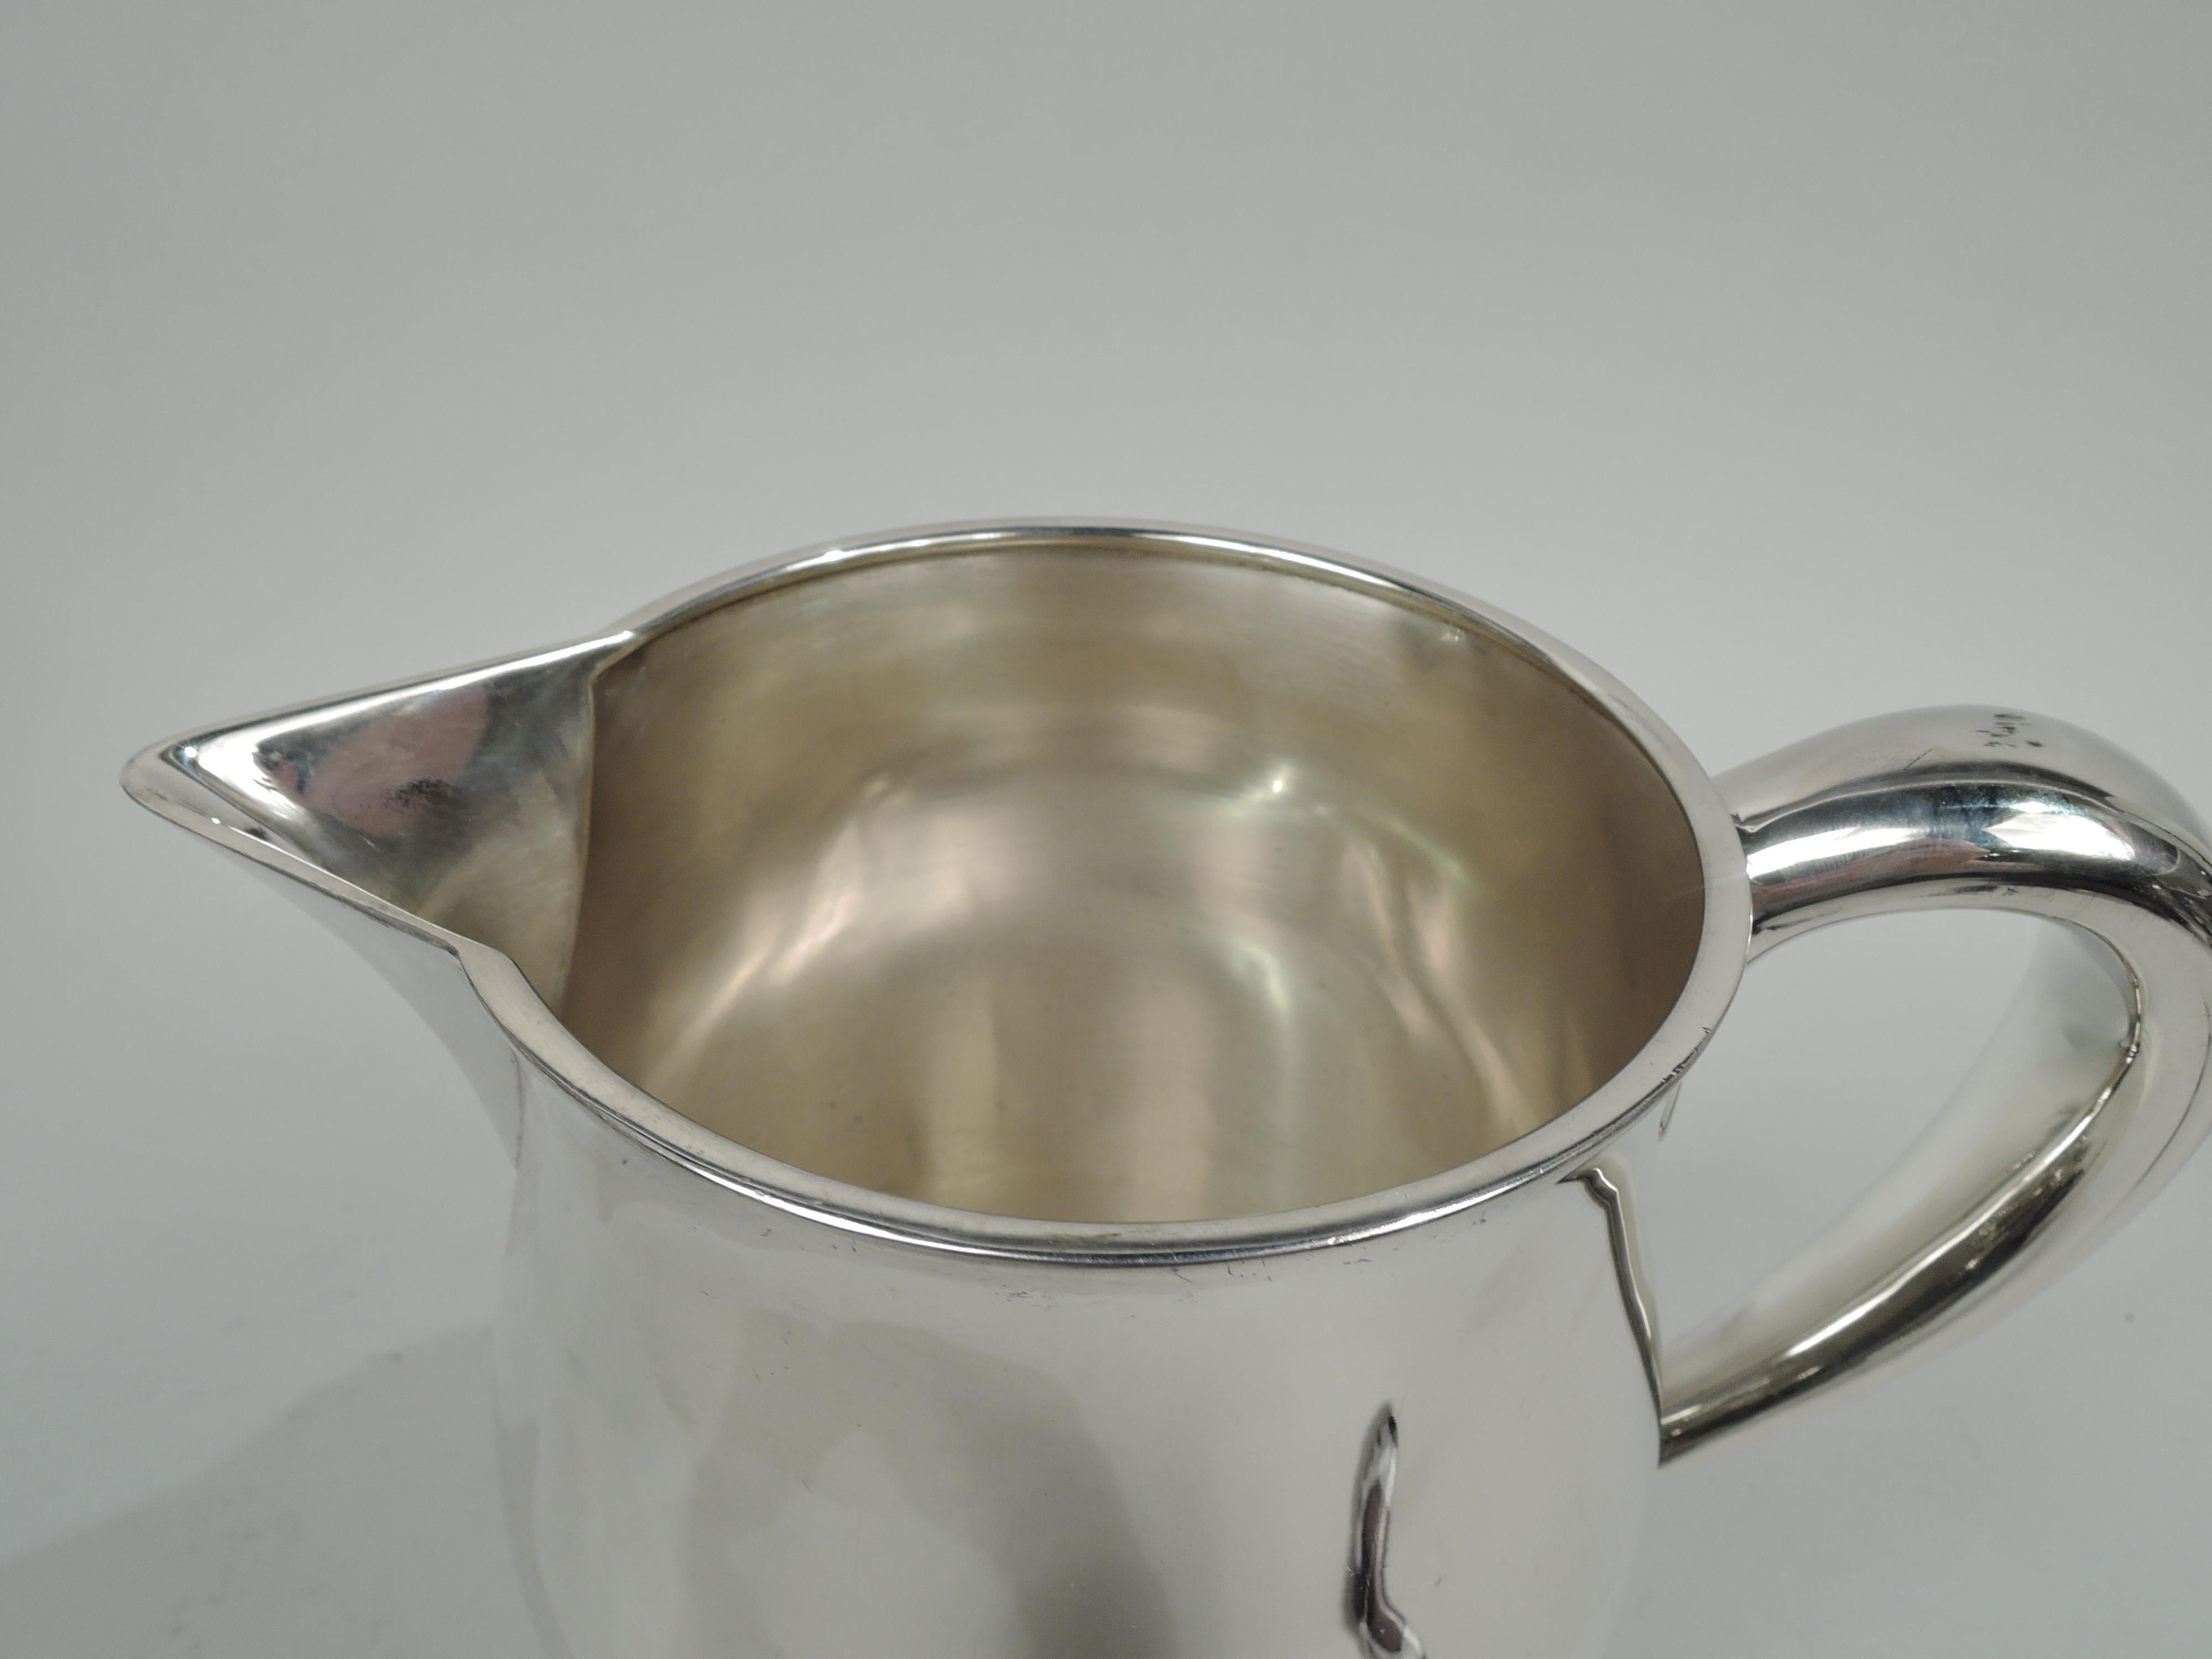 American Federal-style sterling silver water pitcher. Retailed by Cartier in New York, ca 1950. Gently curved body with round mouth, v-spout, and high-looping handle. Fully marked including maker’s (Watson Company) and retailer’s stamps, no. U250,